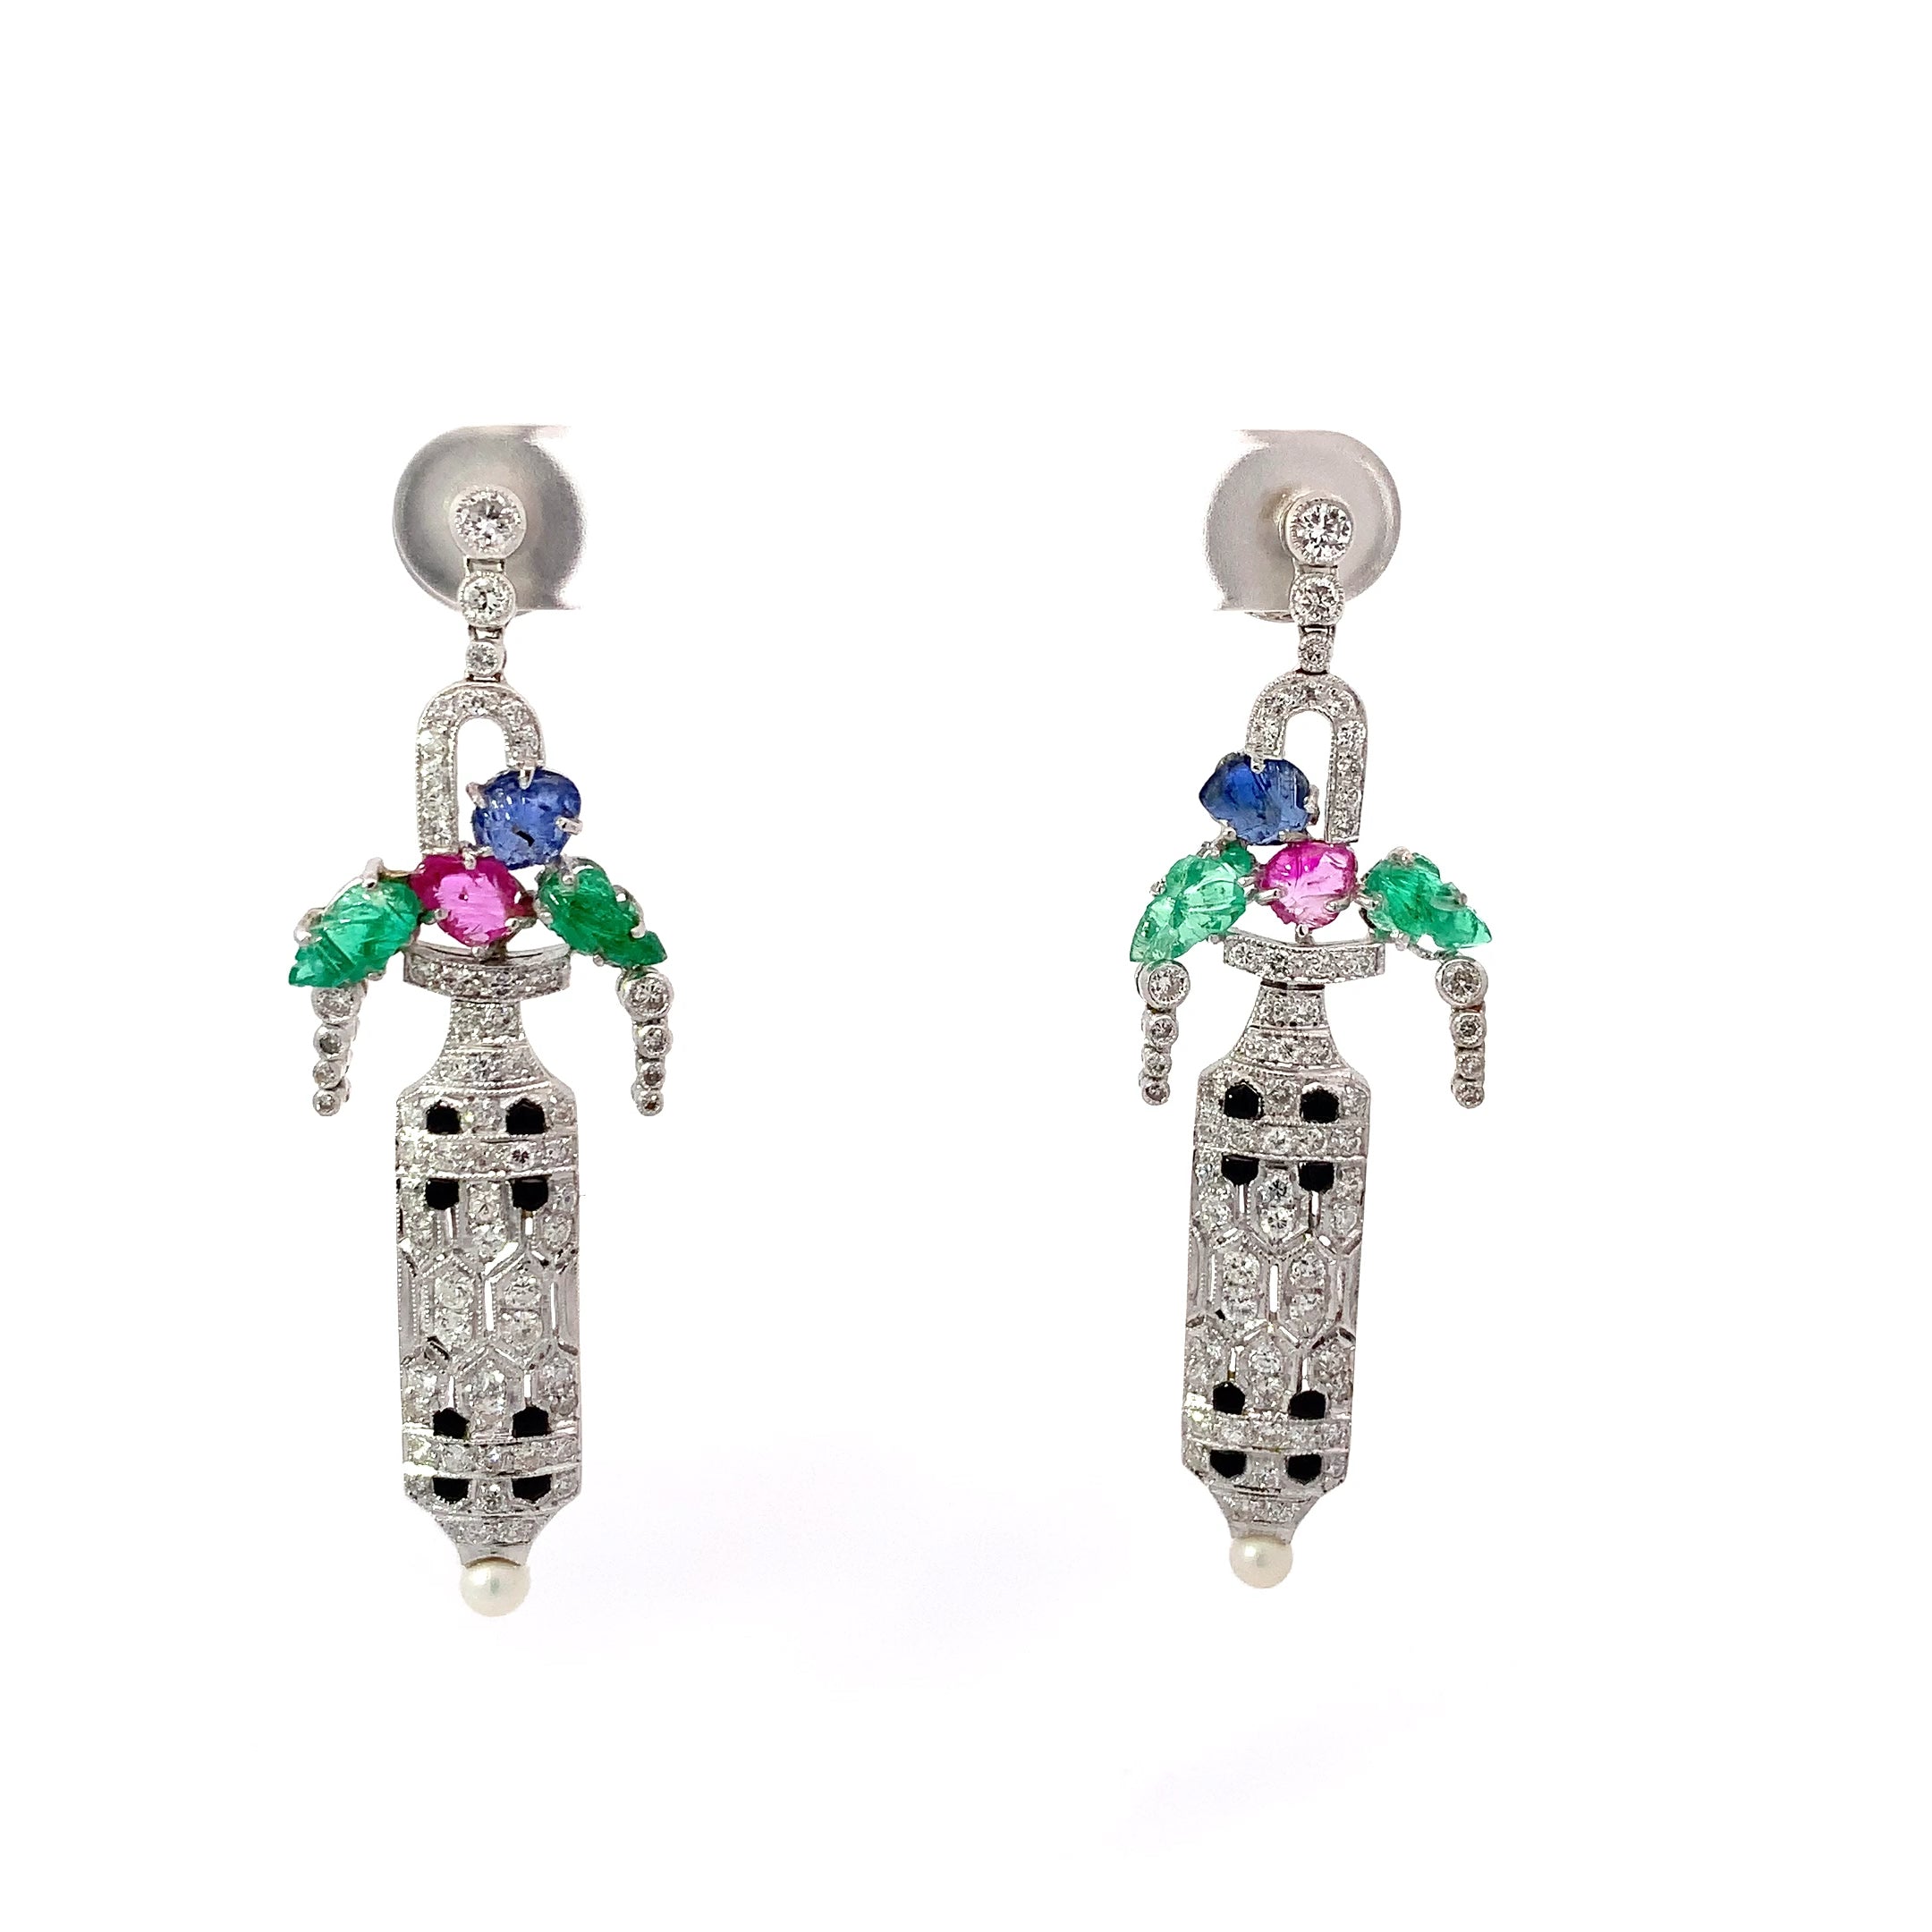 DIAMOND AND COLORED STONE EARRINGS